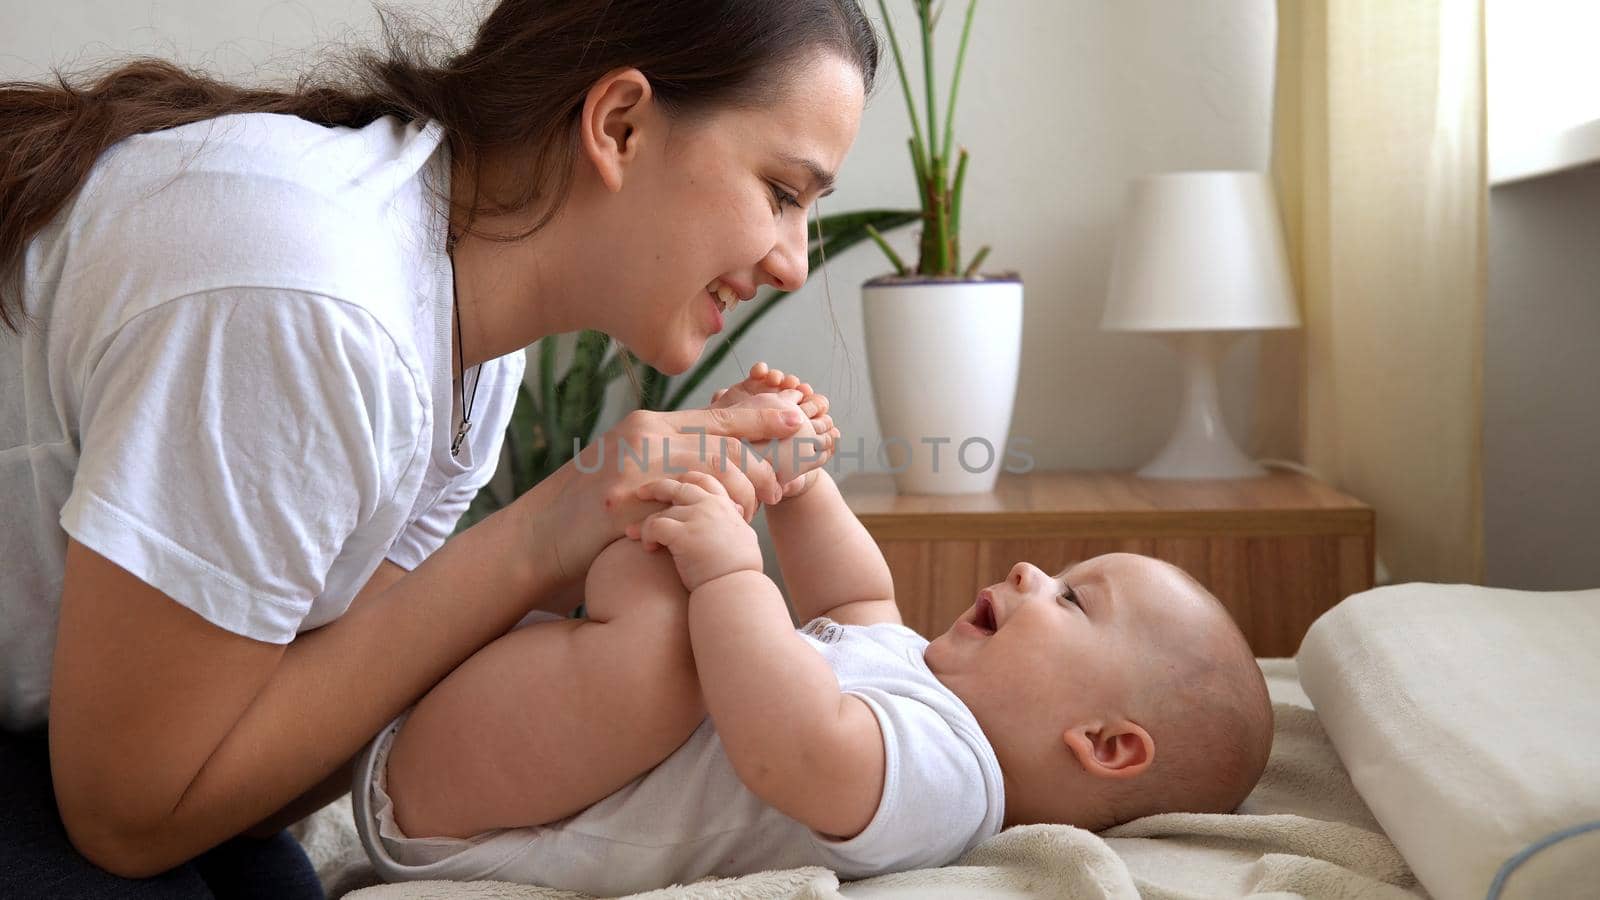 Authentic Young Caucasian Woman Holding Newborn Baby. Mom And Child On Bed. Close-up Portrait of Smiling Family With Infant On Hands. Happy Marriage Couple On Background. Childhood, Parenthood Concept.